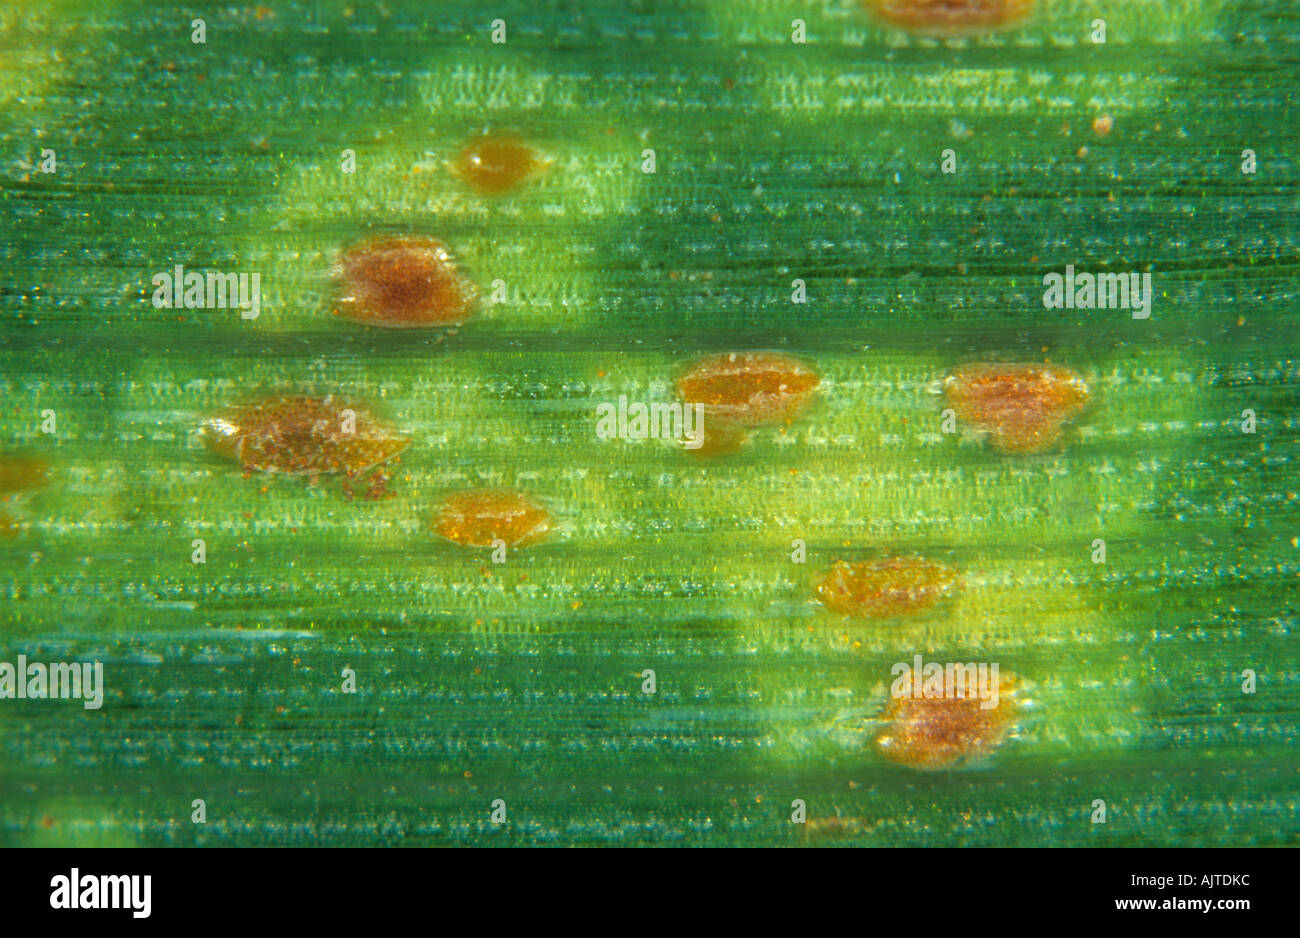 Brown rust Puccinia hordei pustules on a barley leaf Stock Photo